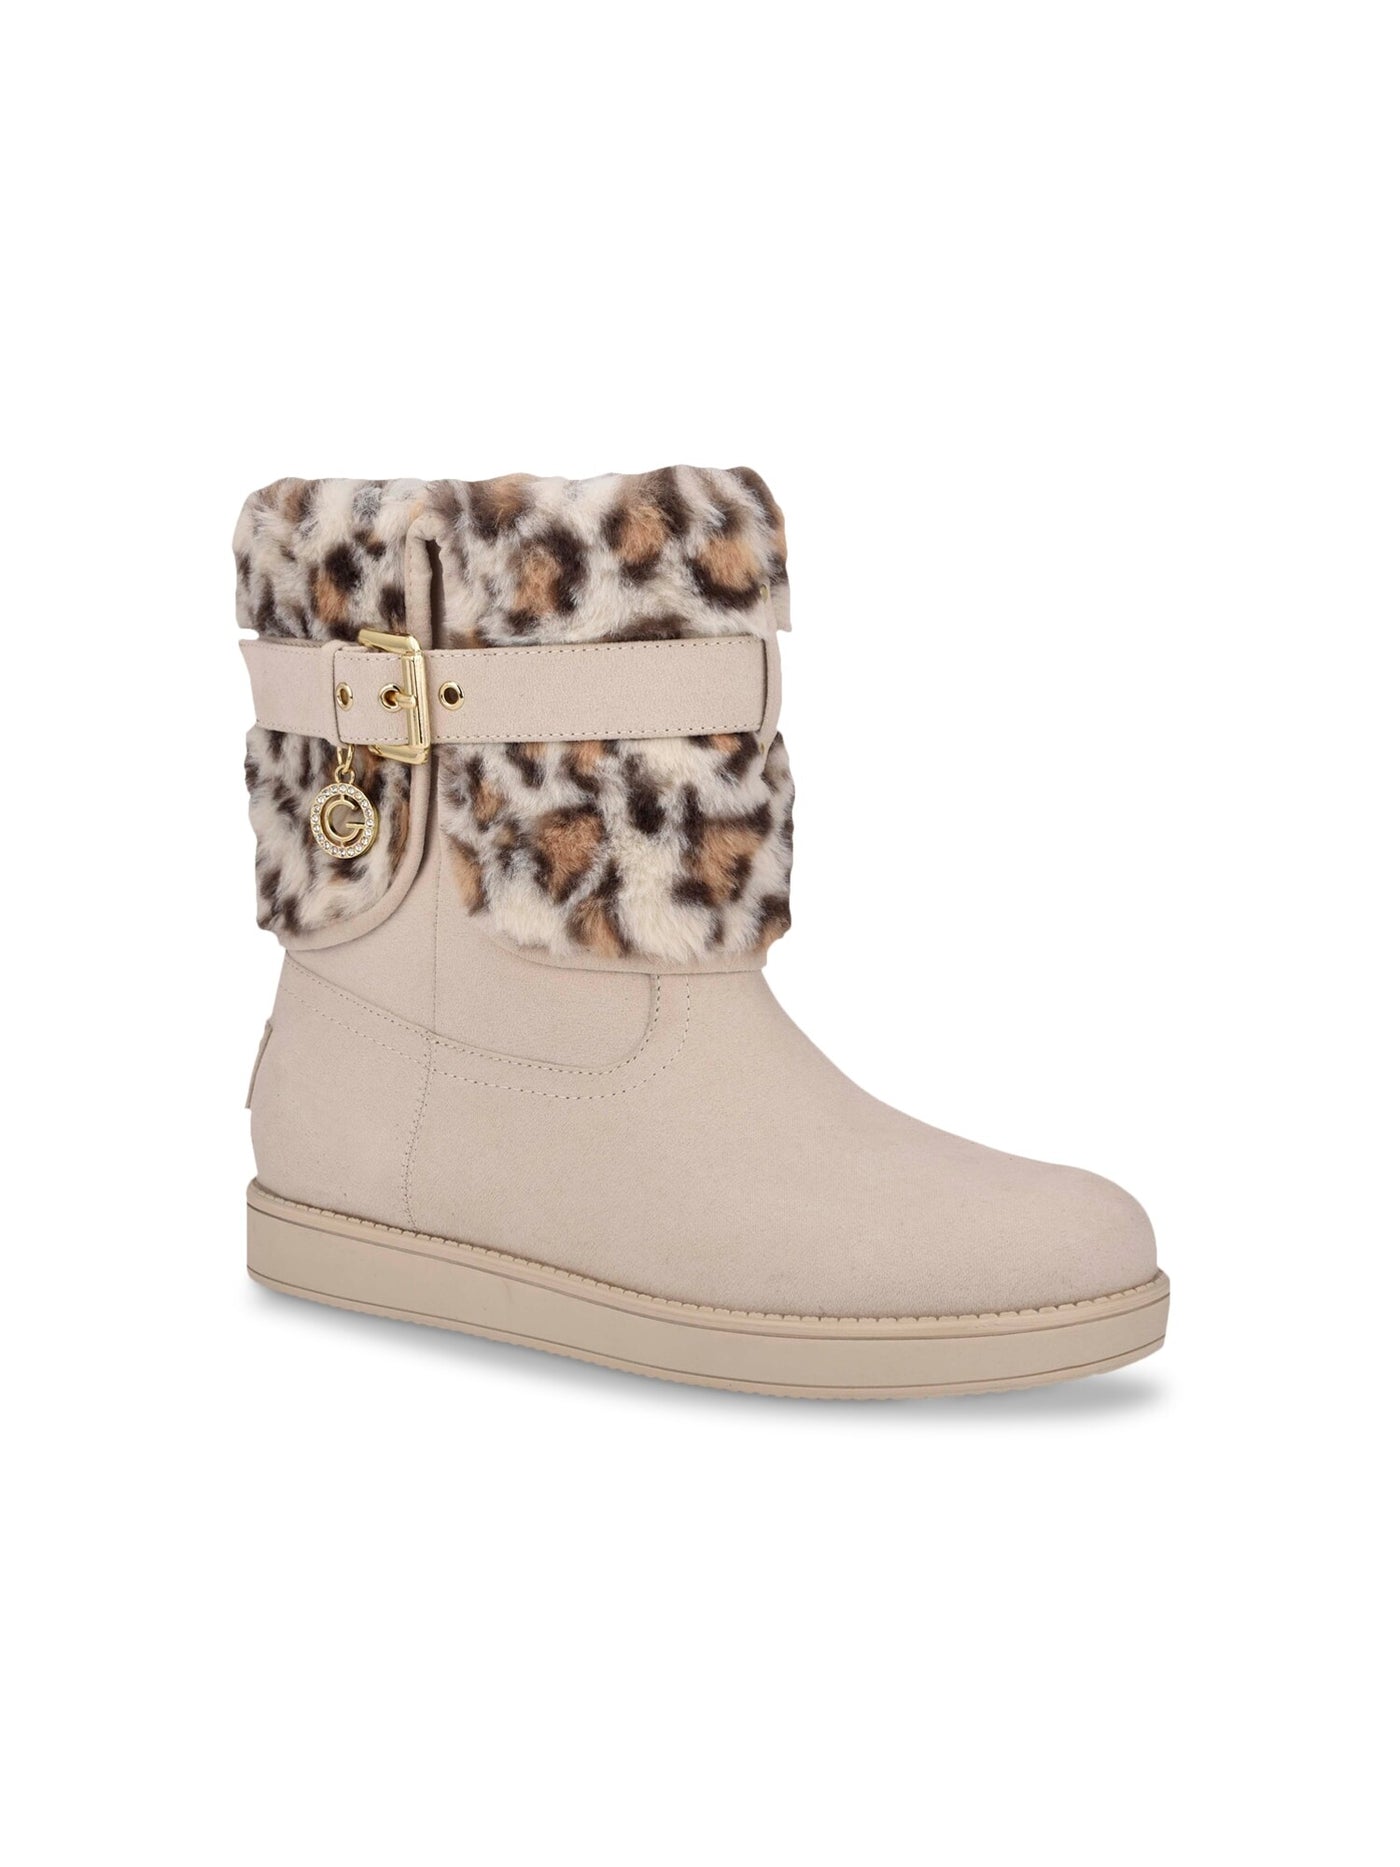 GBG LOS ANGELES Womens Beige Animal Print Buckle Accent Cushioned Adlea Round Toe Snow Boots 5.5